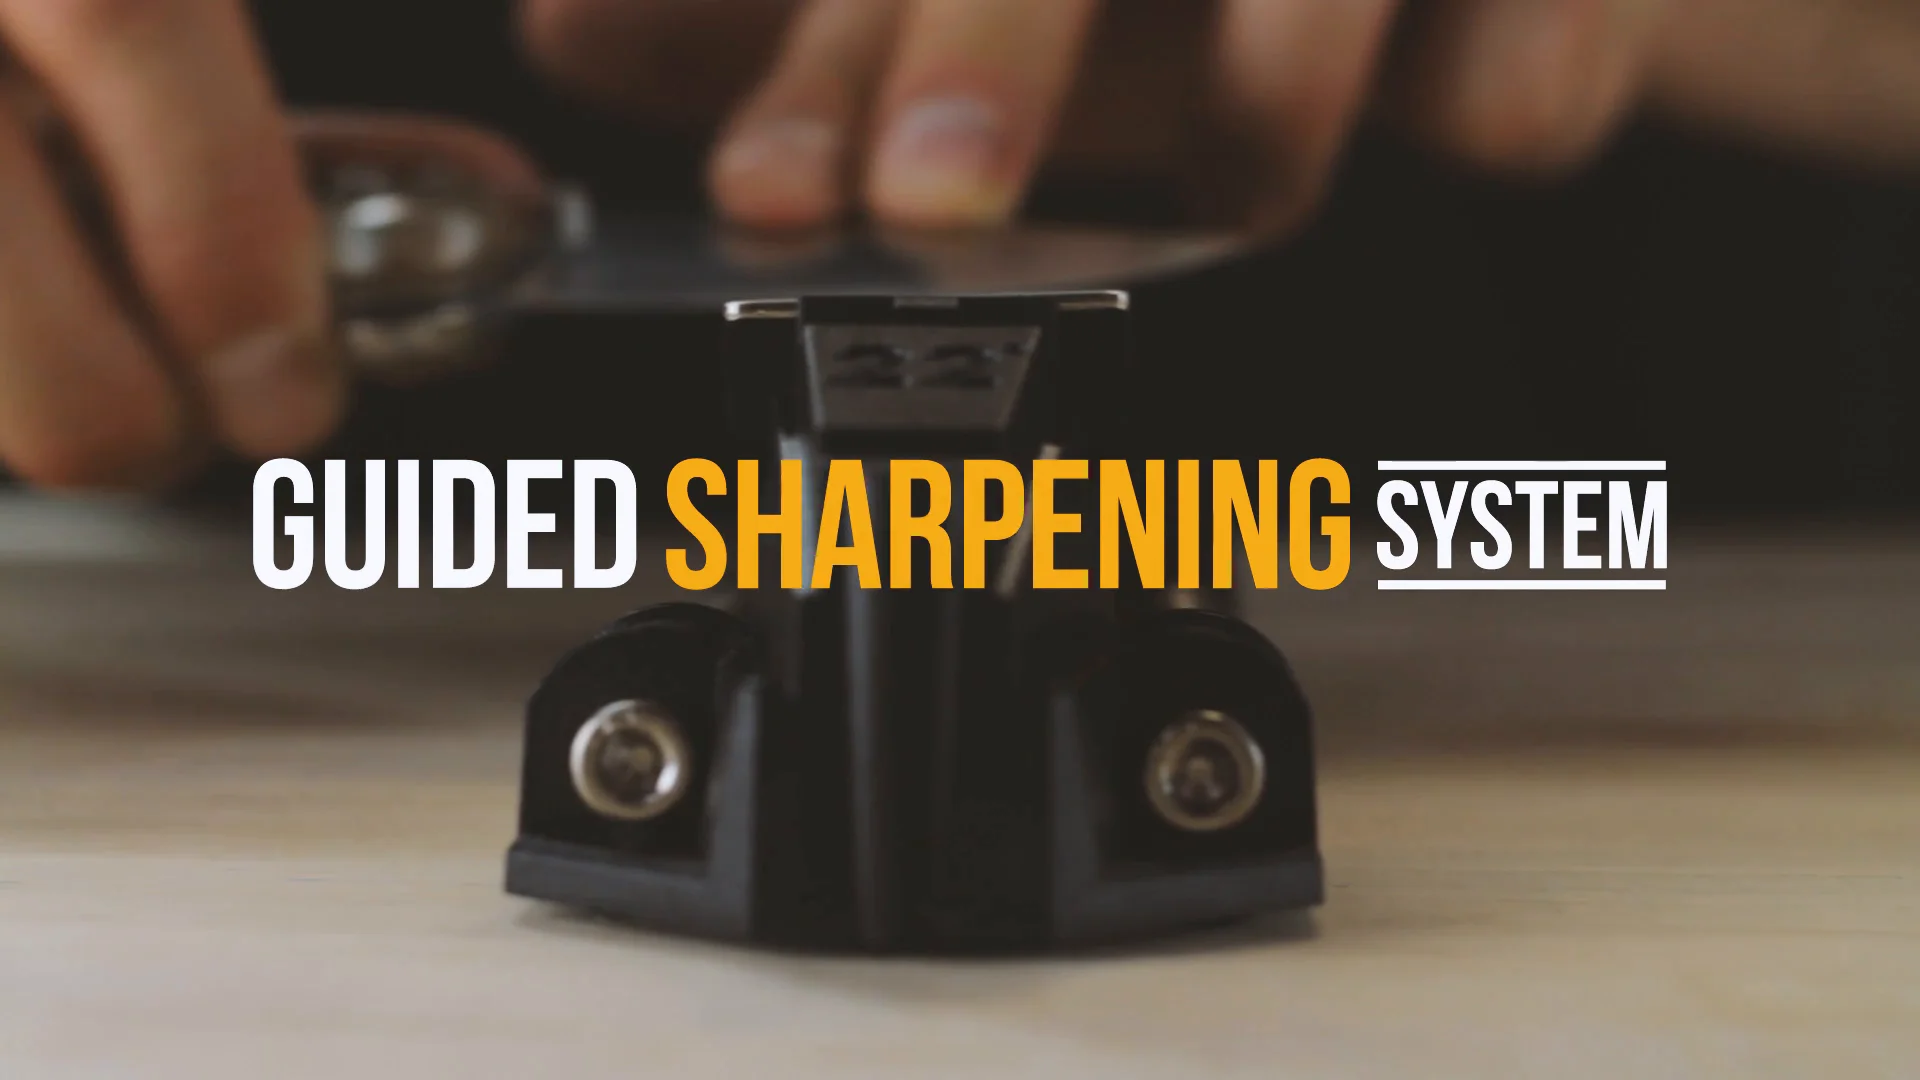 Sharpening a Multi-Tool with the Combo Knife Sharpener on Vimeo